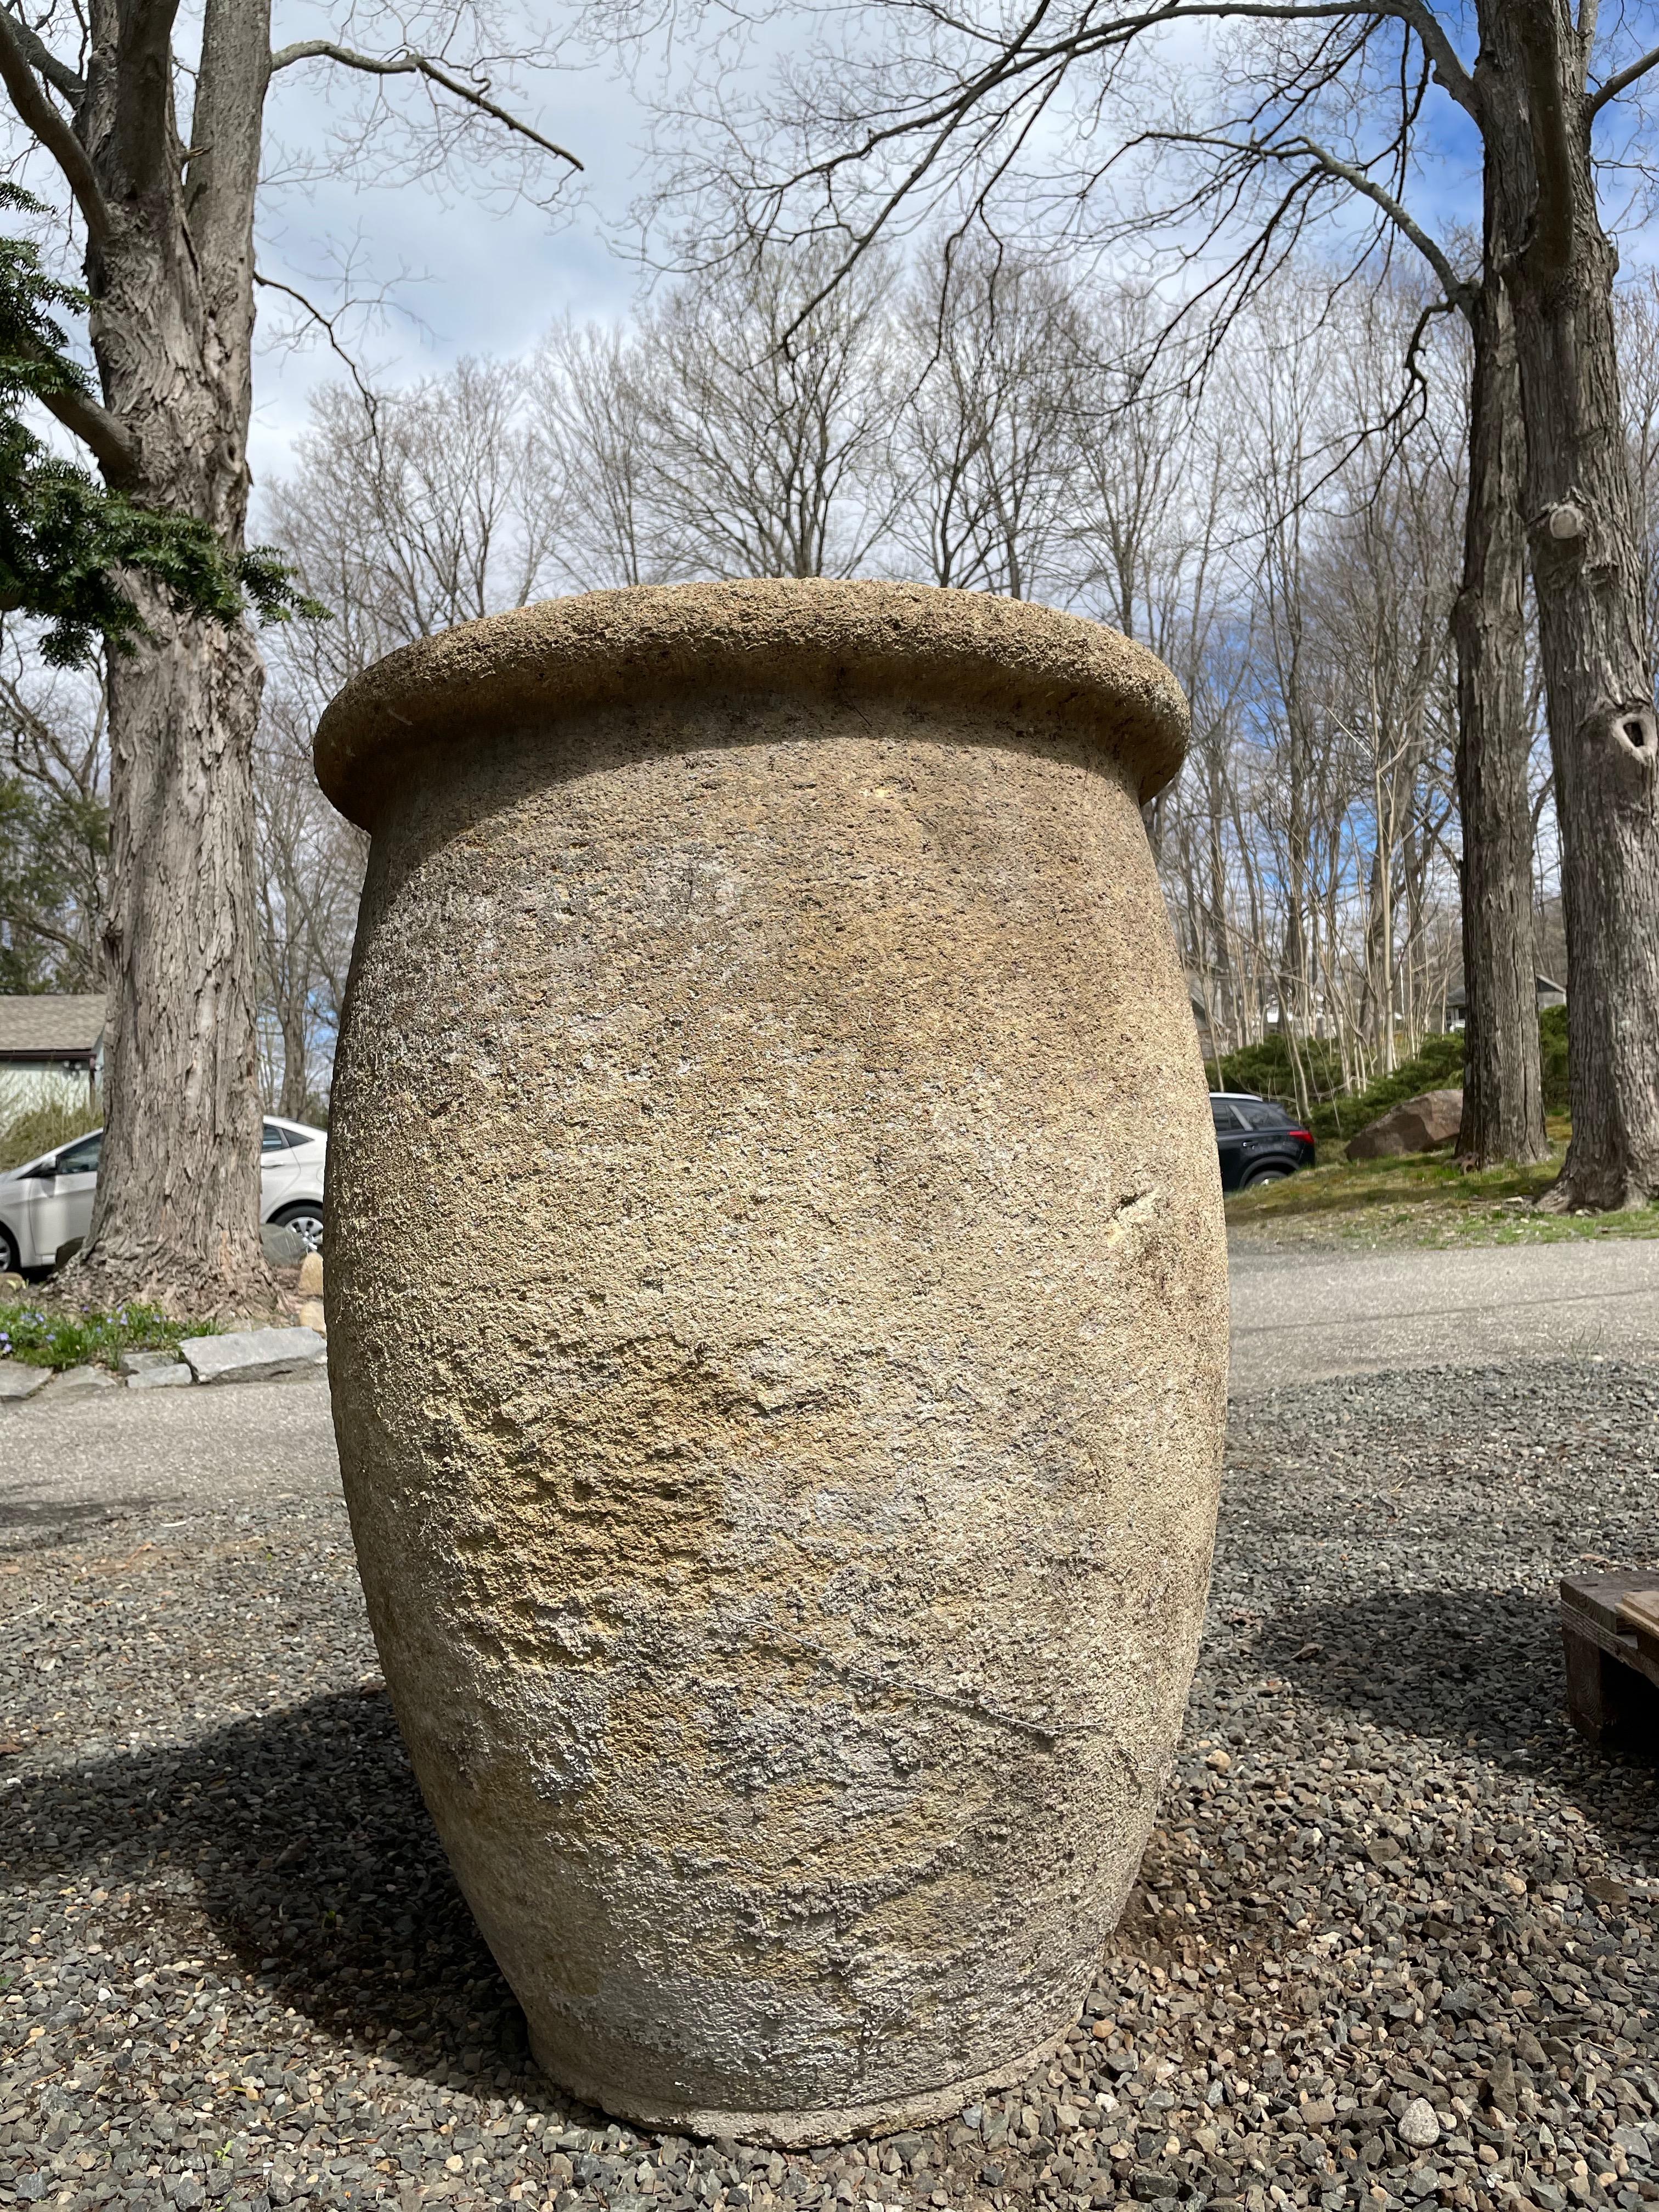 Recently, we were able to source five enormous stone pots hand-carved from Pierre de Rognes, a very hard stone from the area of Aix en Provence and they are stunning. Thick-walled, very rare, and in lovely condition, this grand pot would make a